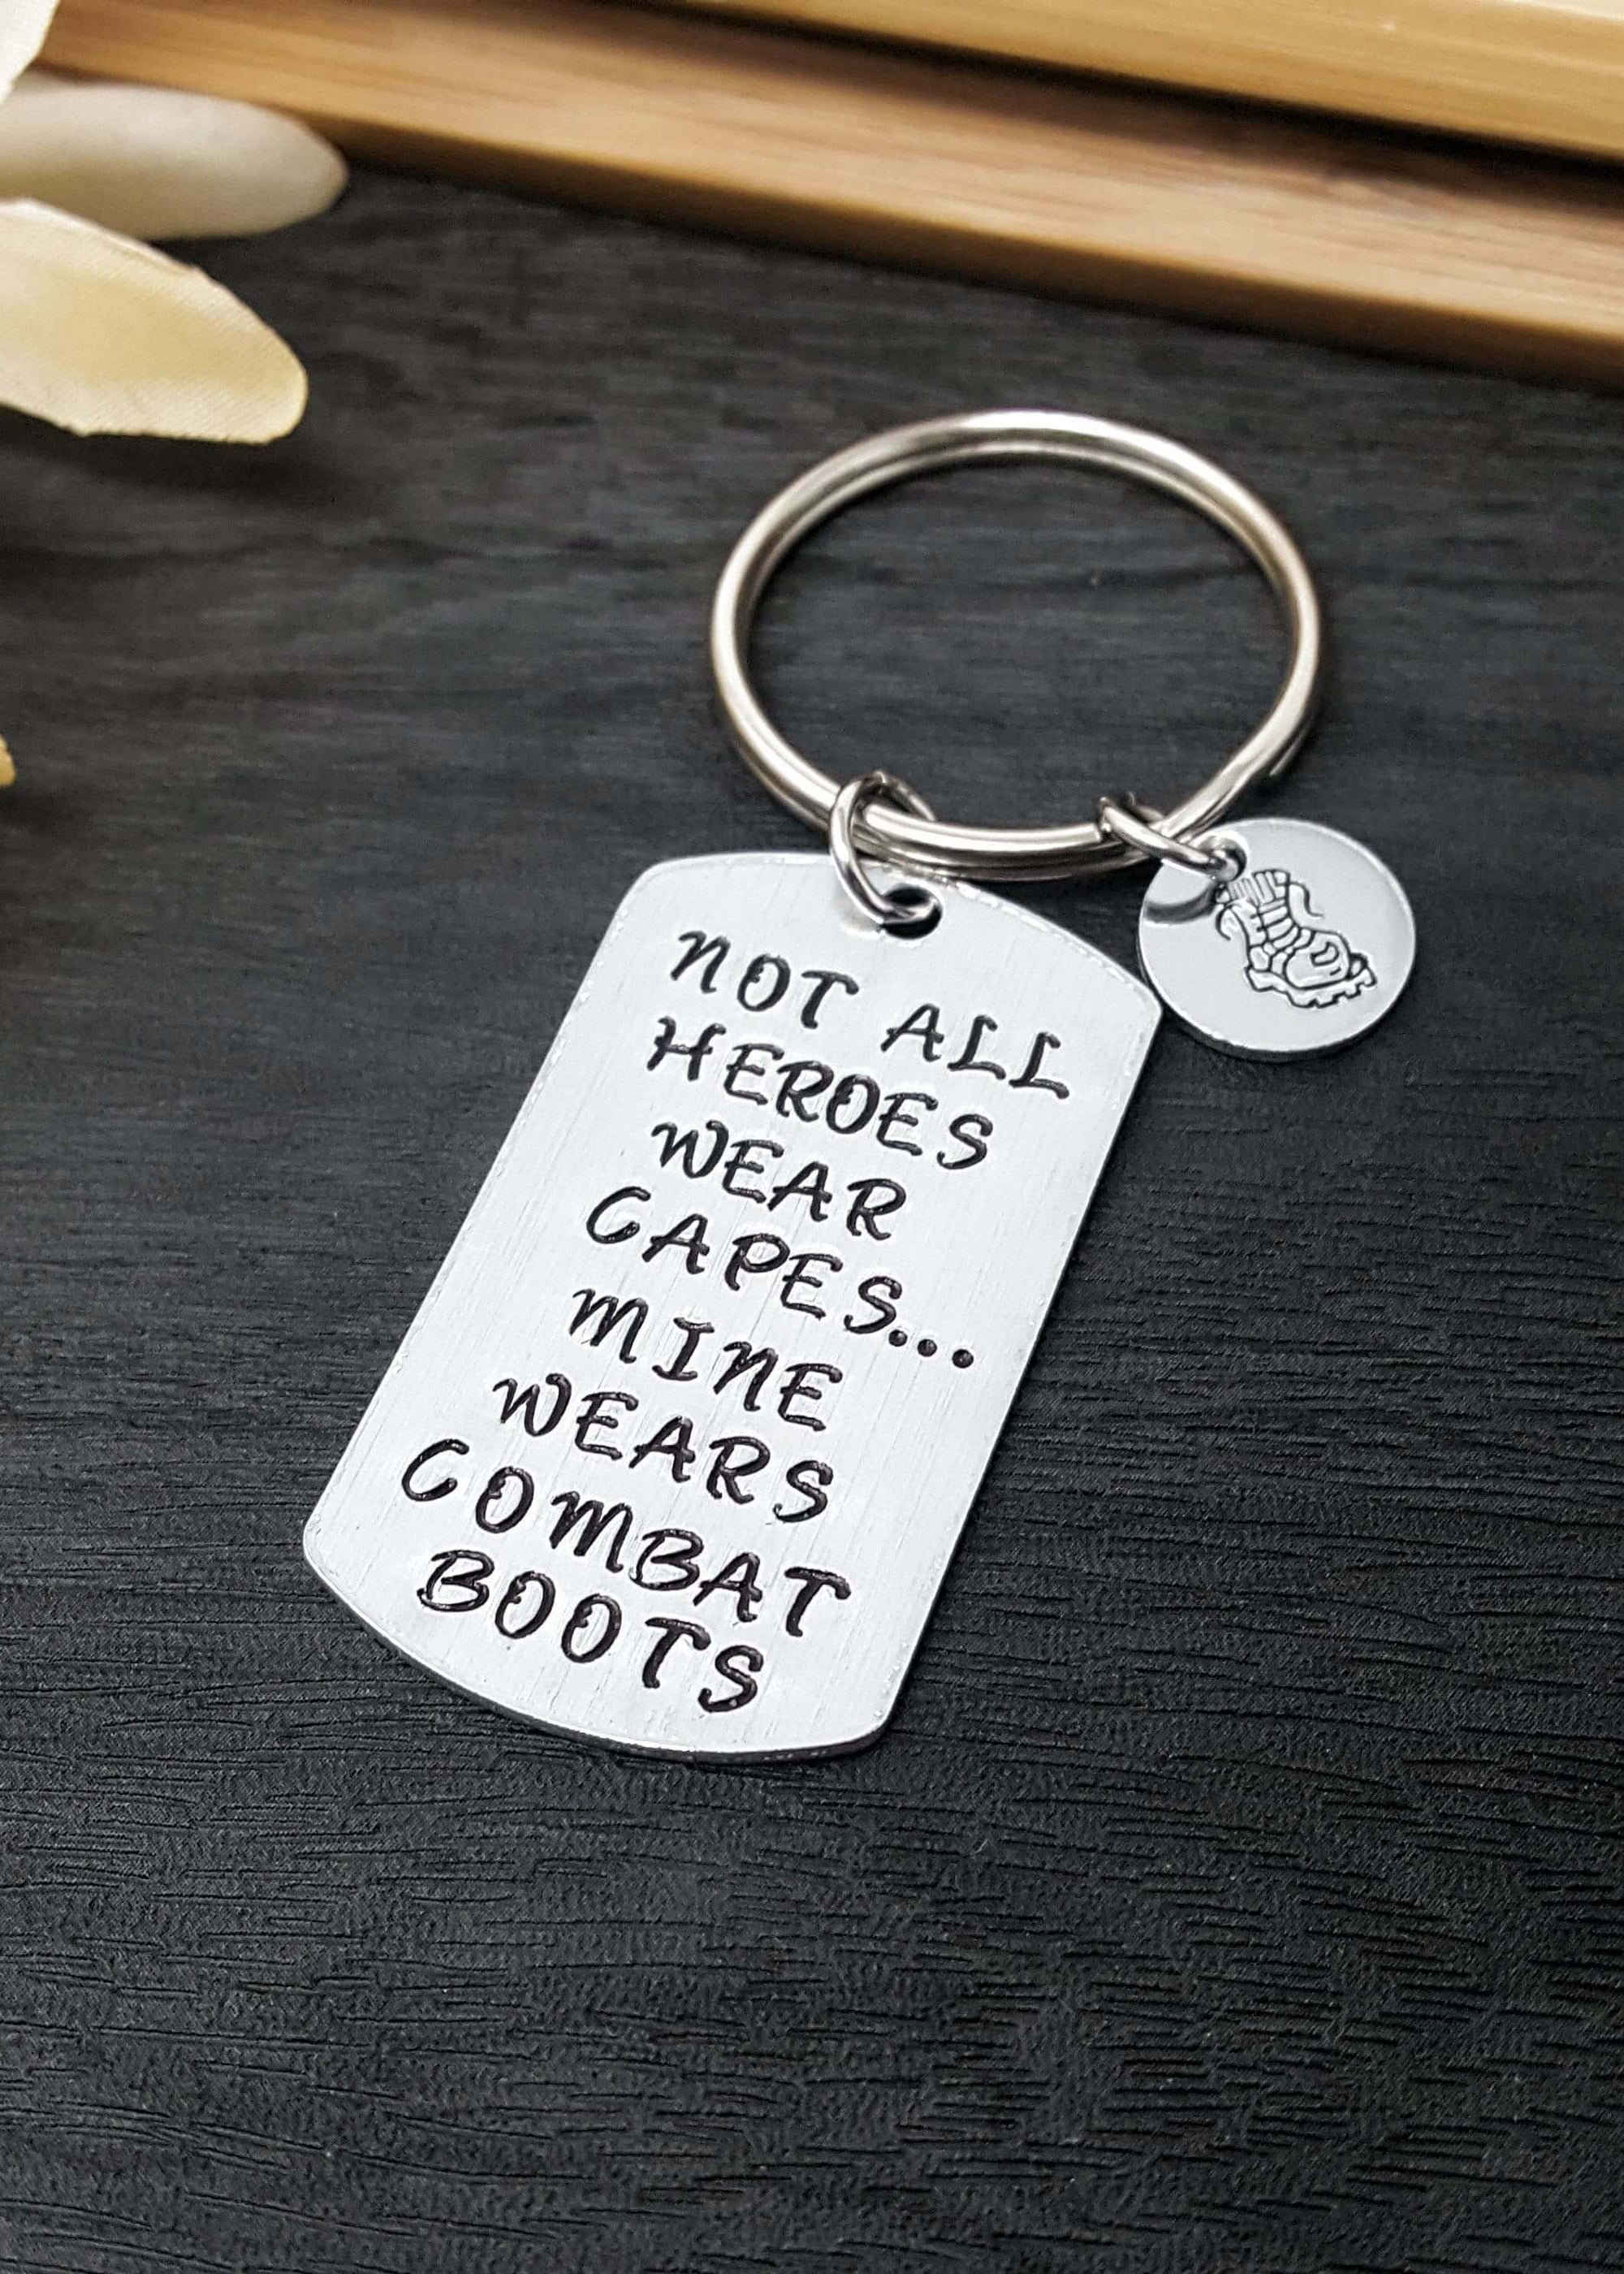 Combat Boots Keychain, Not All Heroes Wear Capes, Boot Camp Gift, Boot Camp Graduation, Keychains, HandmadeLoveStories, HandmadeLoveStories , [Handmade_Love_Stories], [Hand_Stamped_Jewelry], [Etsy_Stamped_Jewelry], [Etsy_Jewelry]